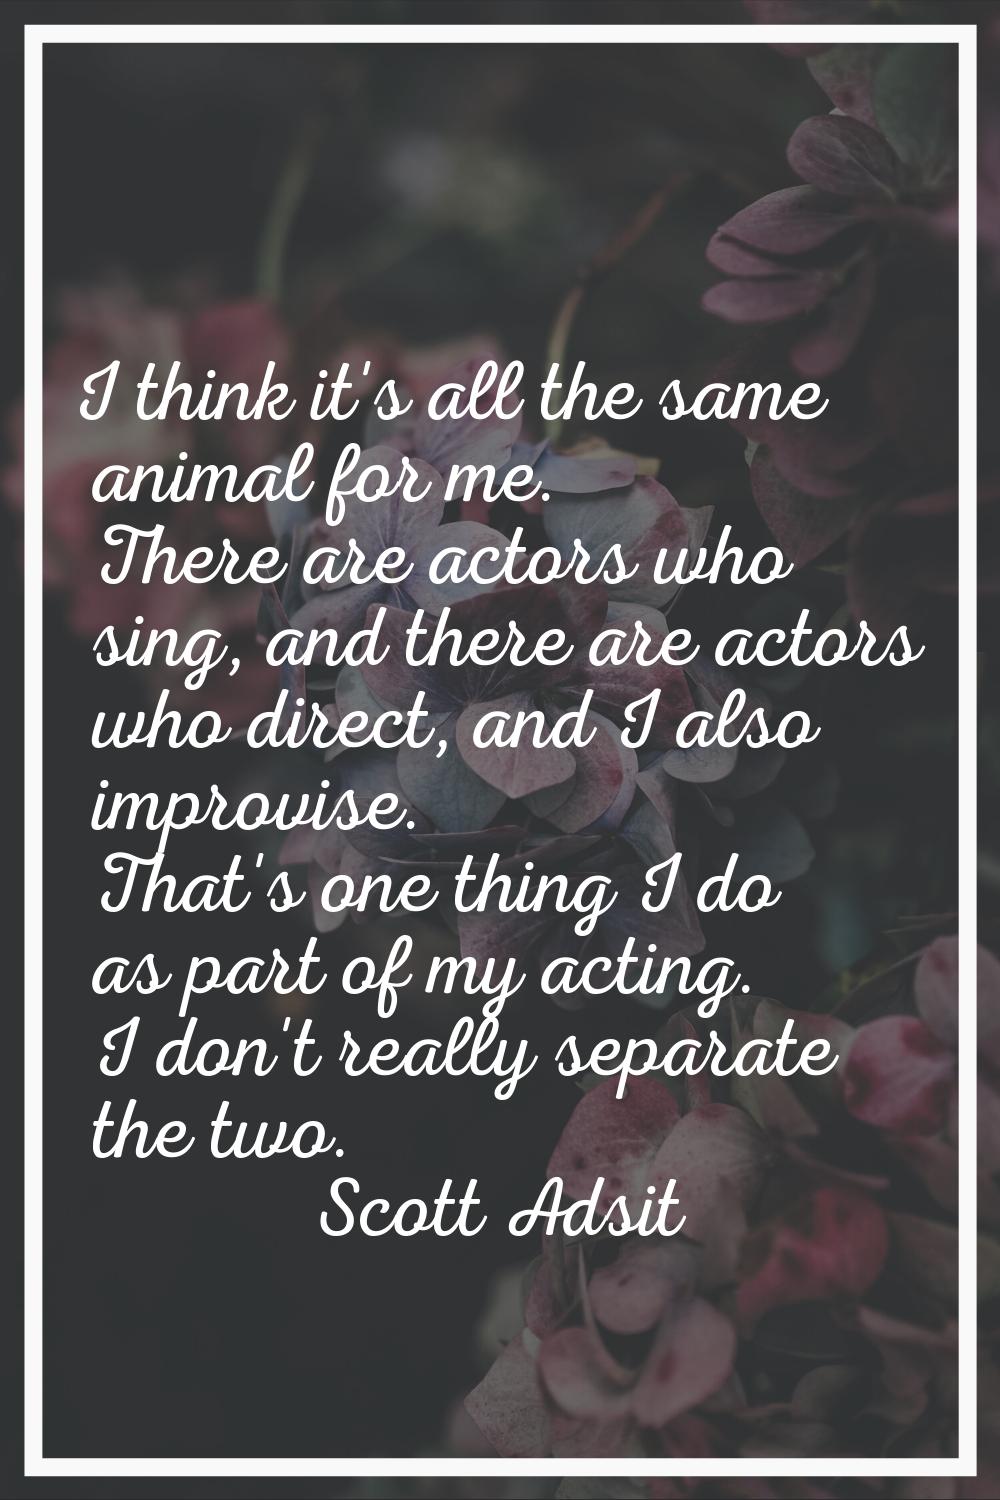 I think it's all the same animal for me. There are actors who sing, and there are actors who direct